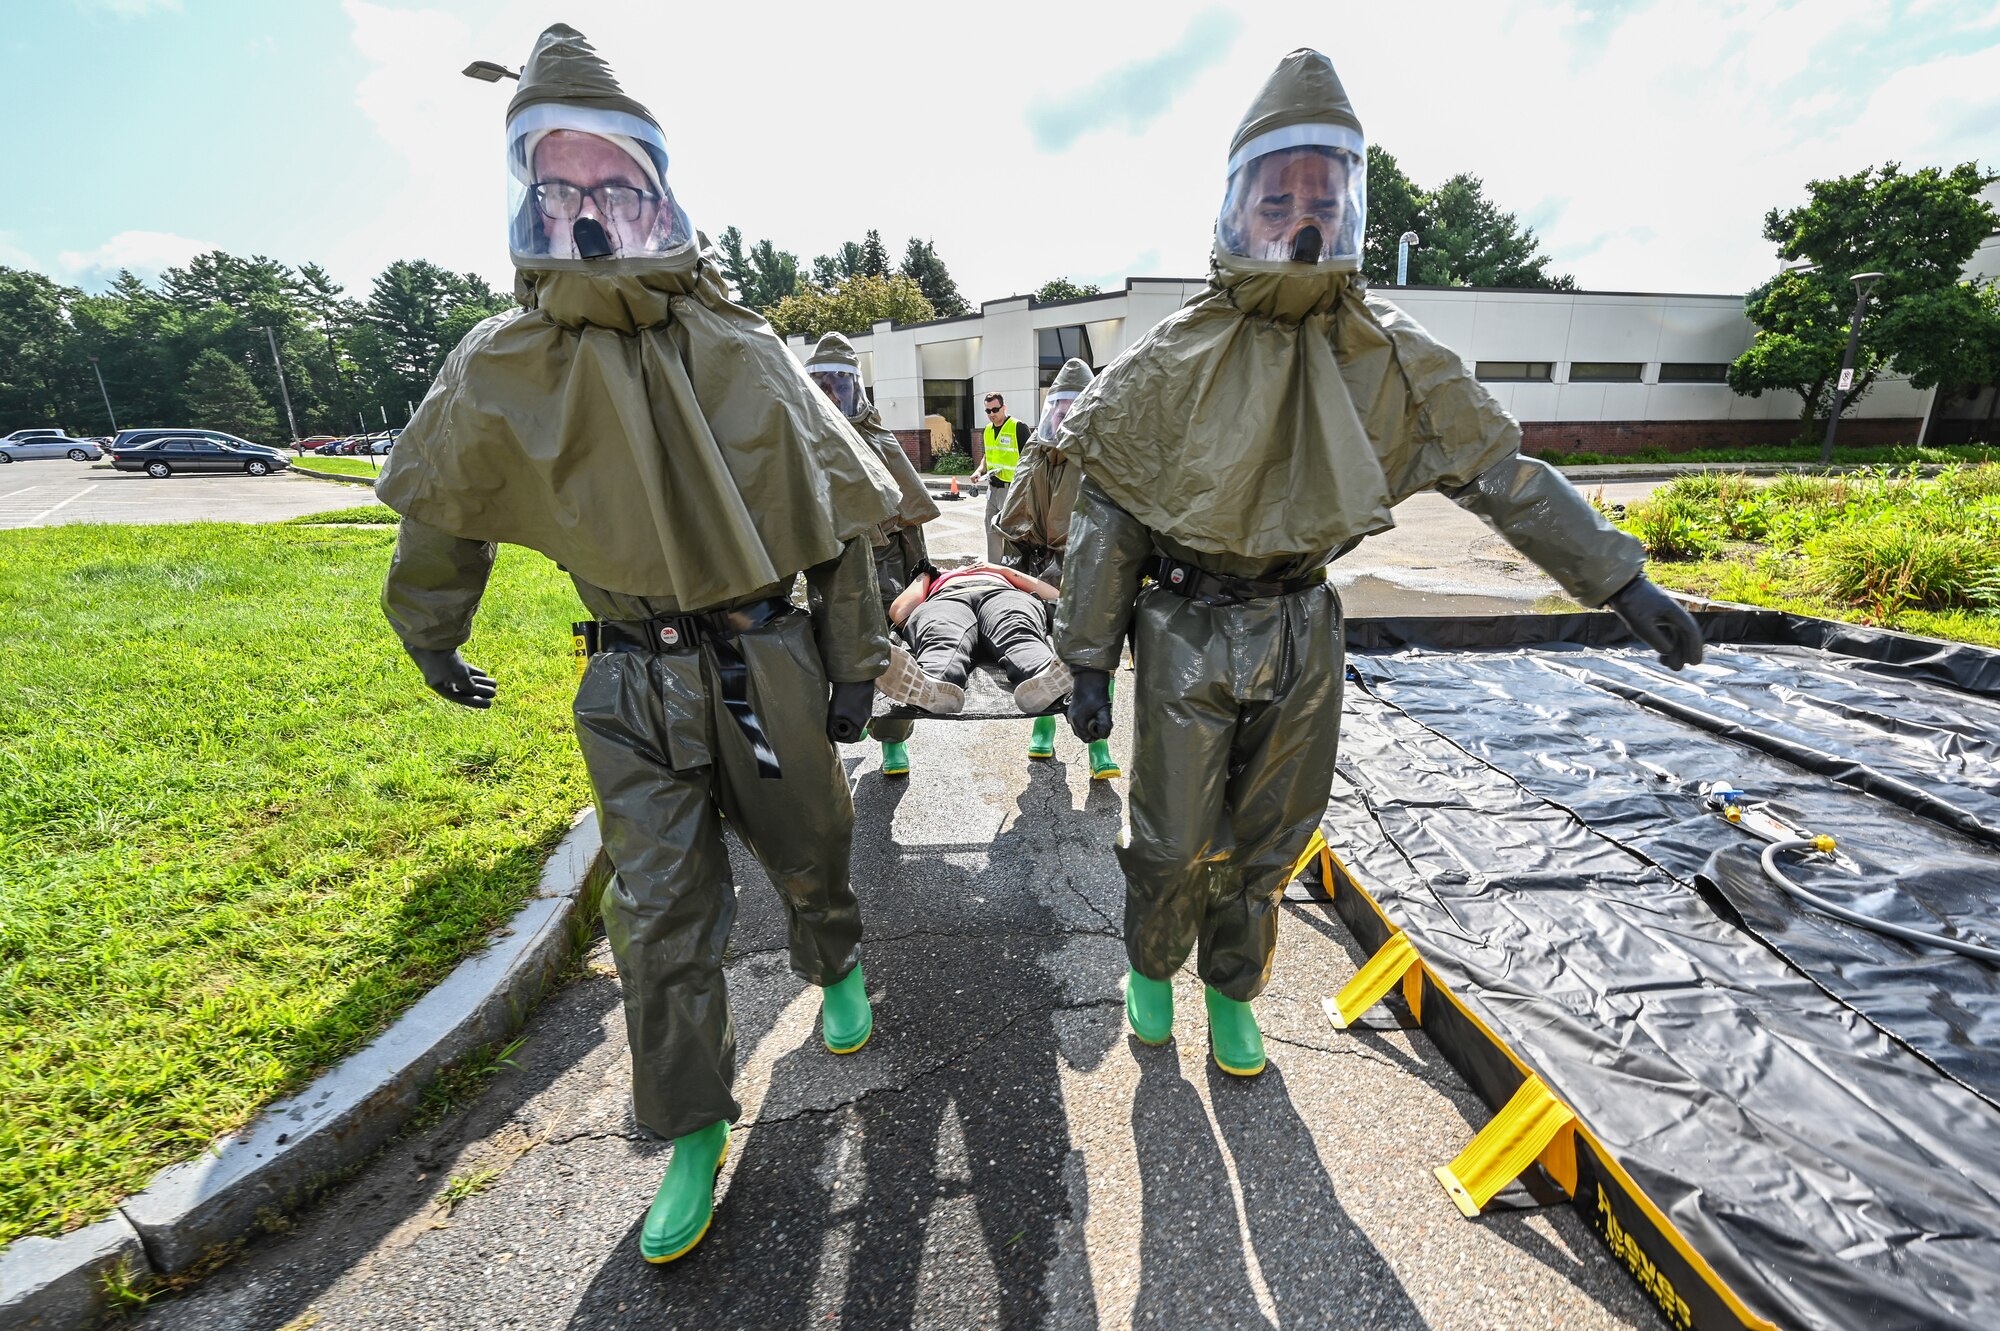 66th Medical Squadron In-Place Patient Decontamination Team members Senior Airmen Gavin Fluery and Ezekiel Grogan, carry an injured role player, Staff Sgt. Leilanie Kenley, 66th Security Forces Squadron NCO in charge of commander support staff, to a decontamination tent during a Ready Eagle exercise at Hanscom Air Force Base, Mass., July 30. The disaster response exercise prepared MDS staff to respond to chemical, biological, radiological, nuclear, or explosive incidents. (U.S. Air Force photo by Todd Maki)